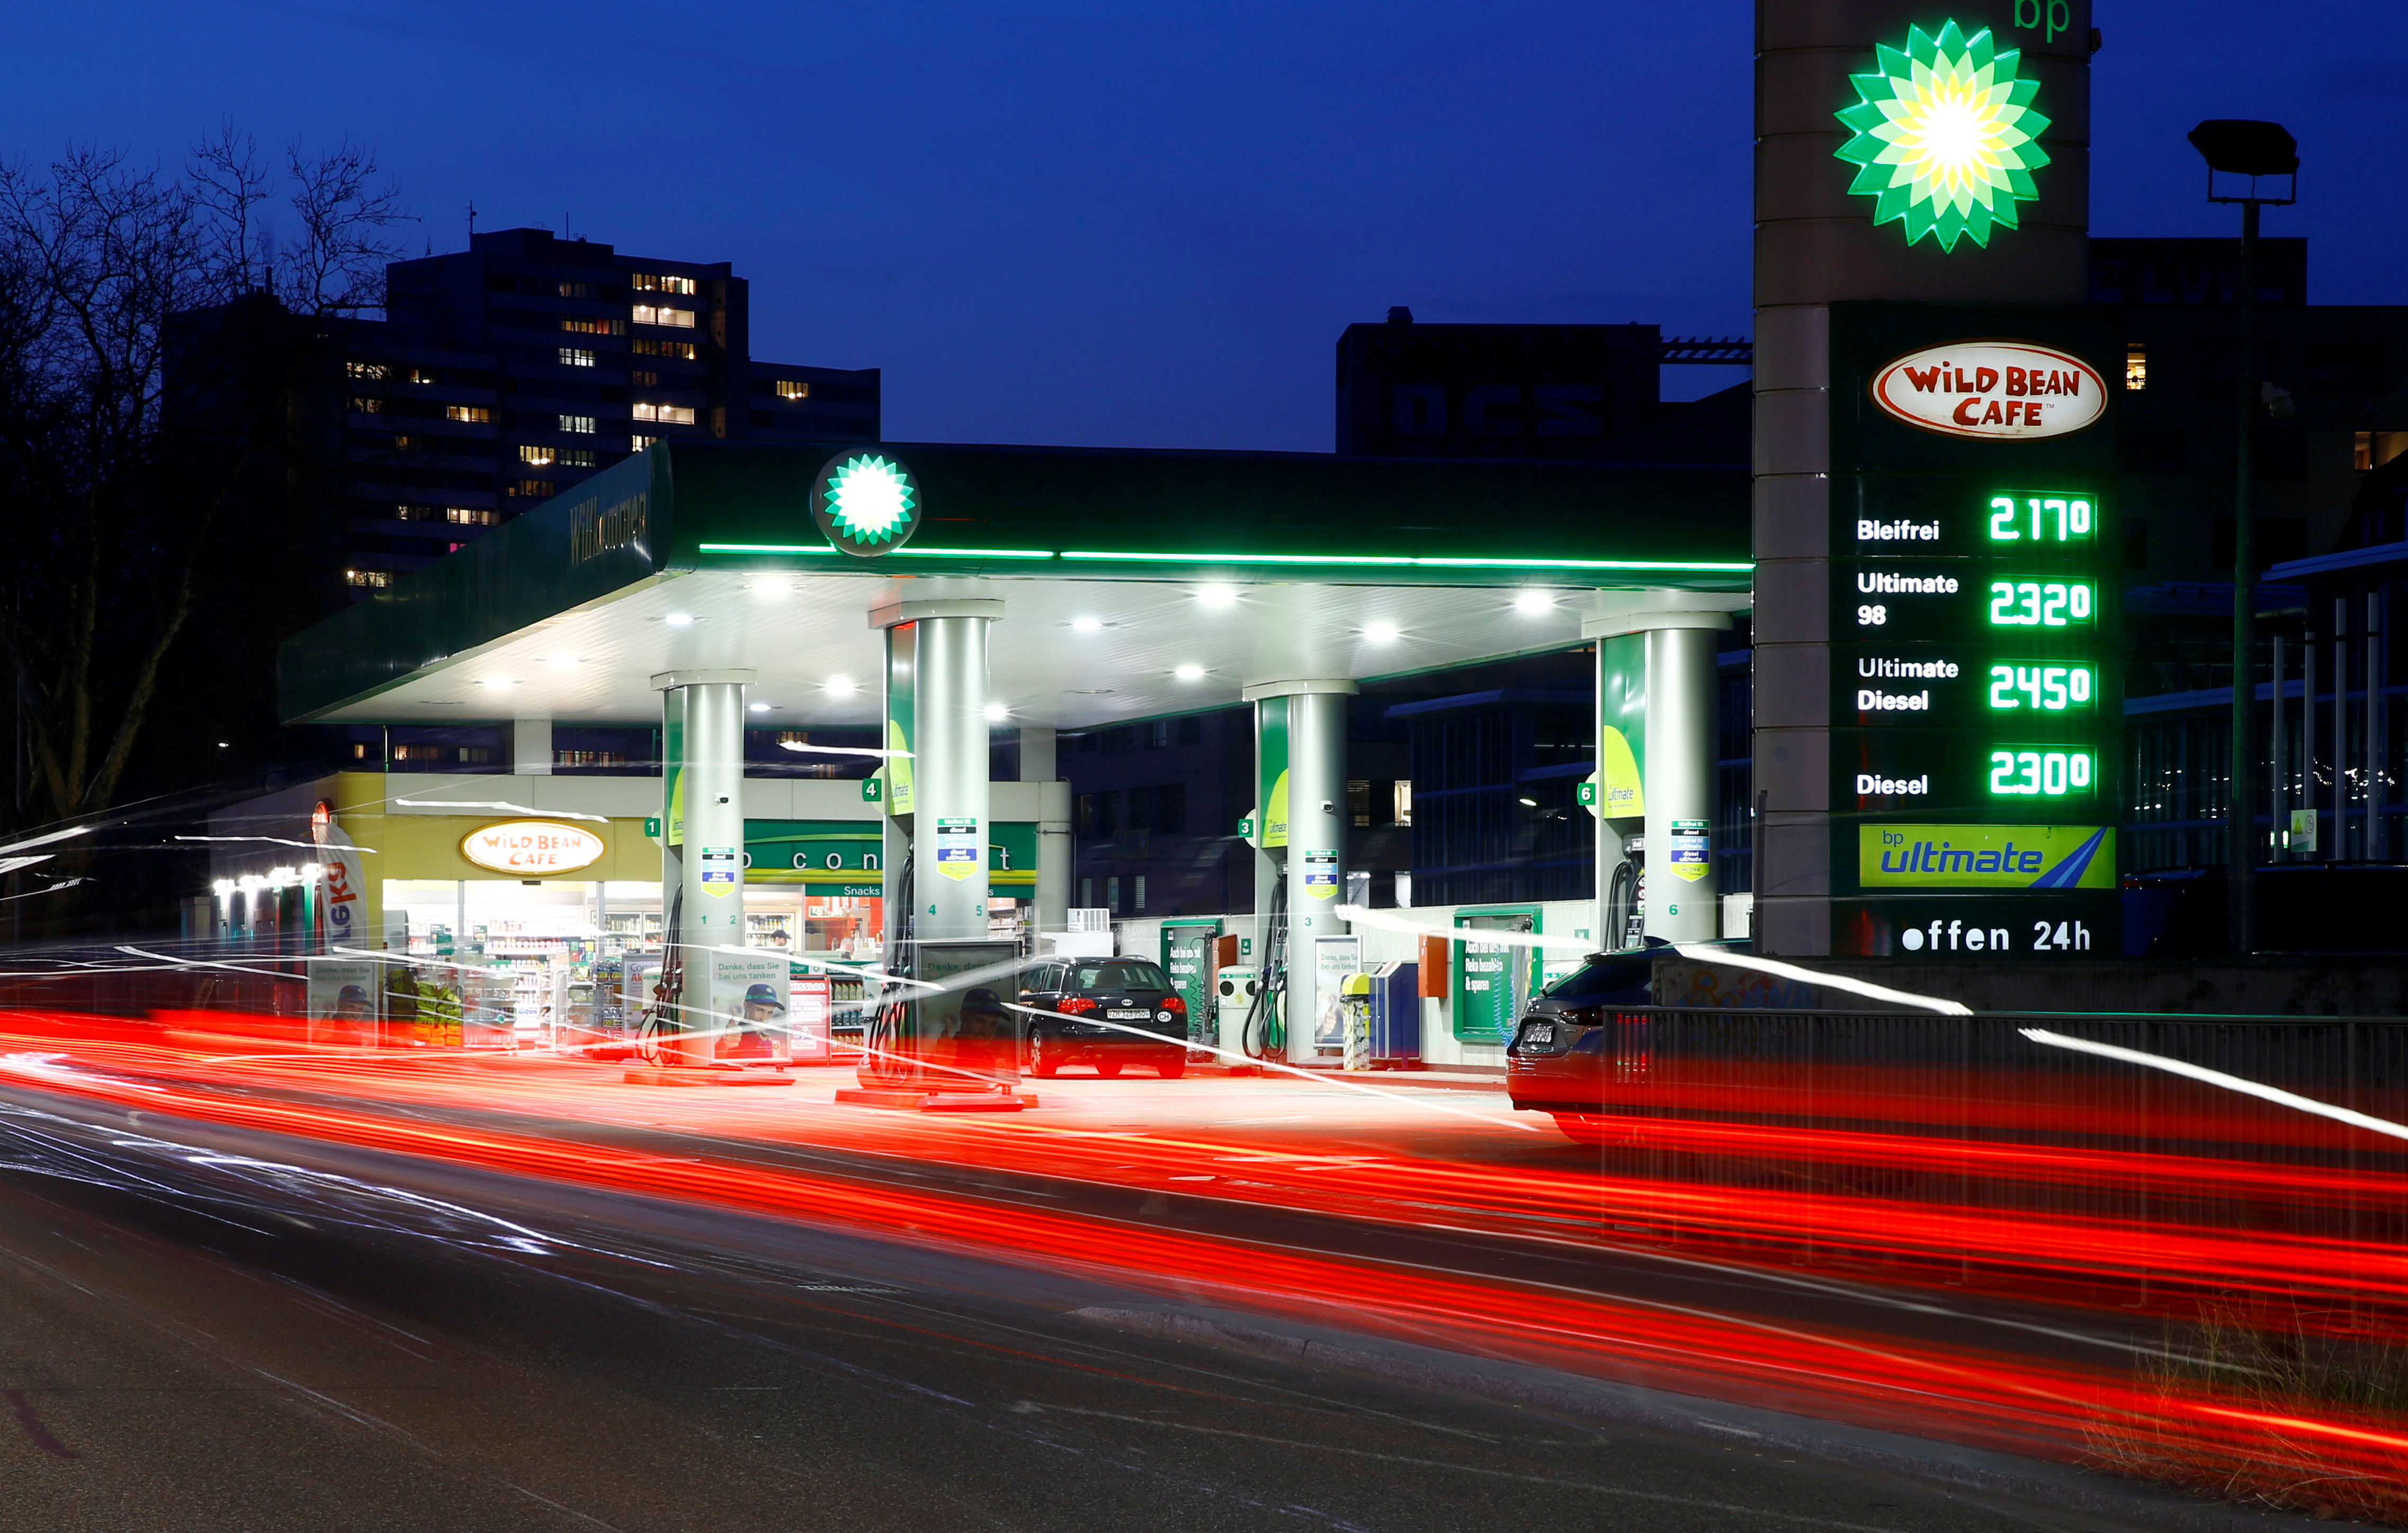 A display shows fuel prices at a BP gas station in Zurich